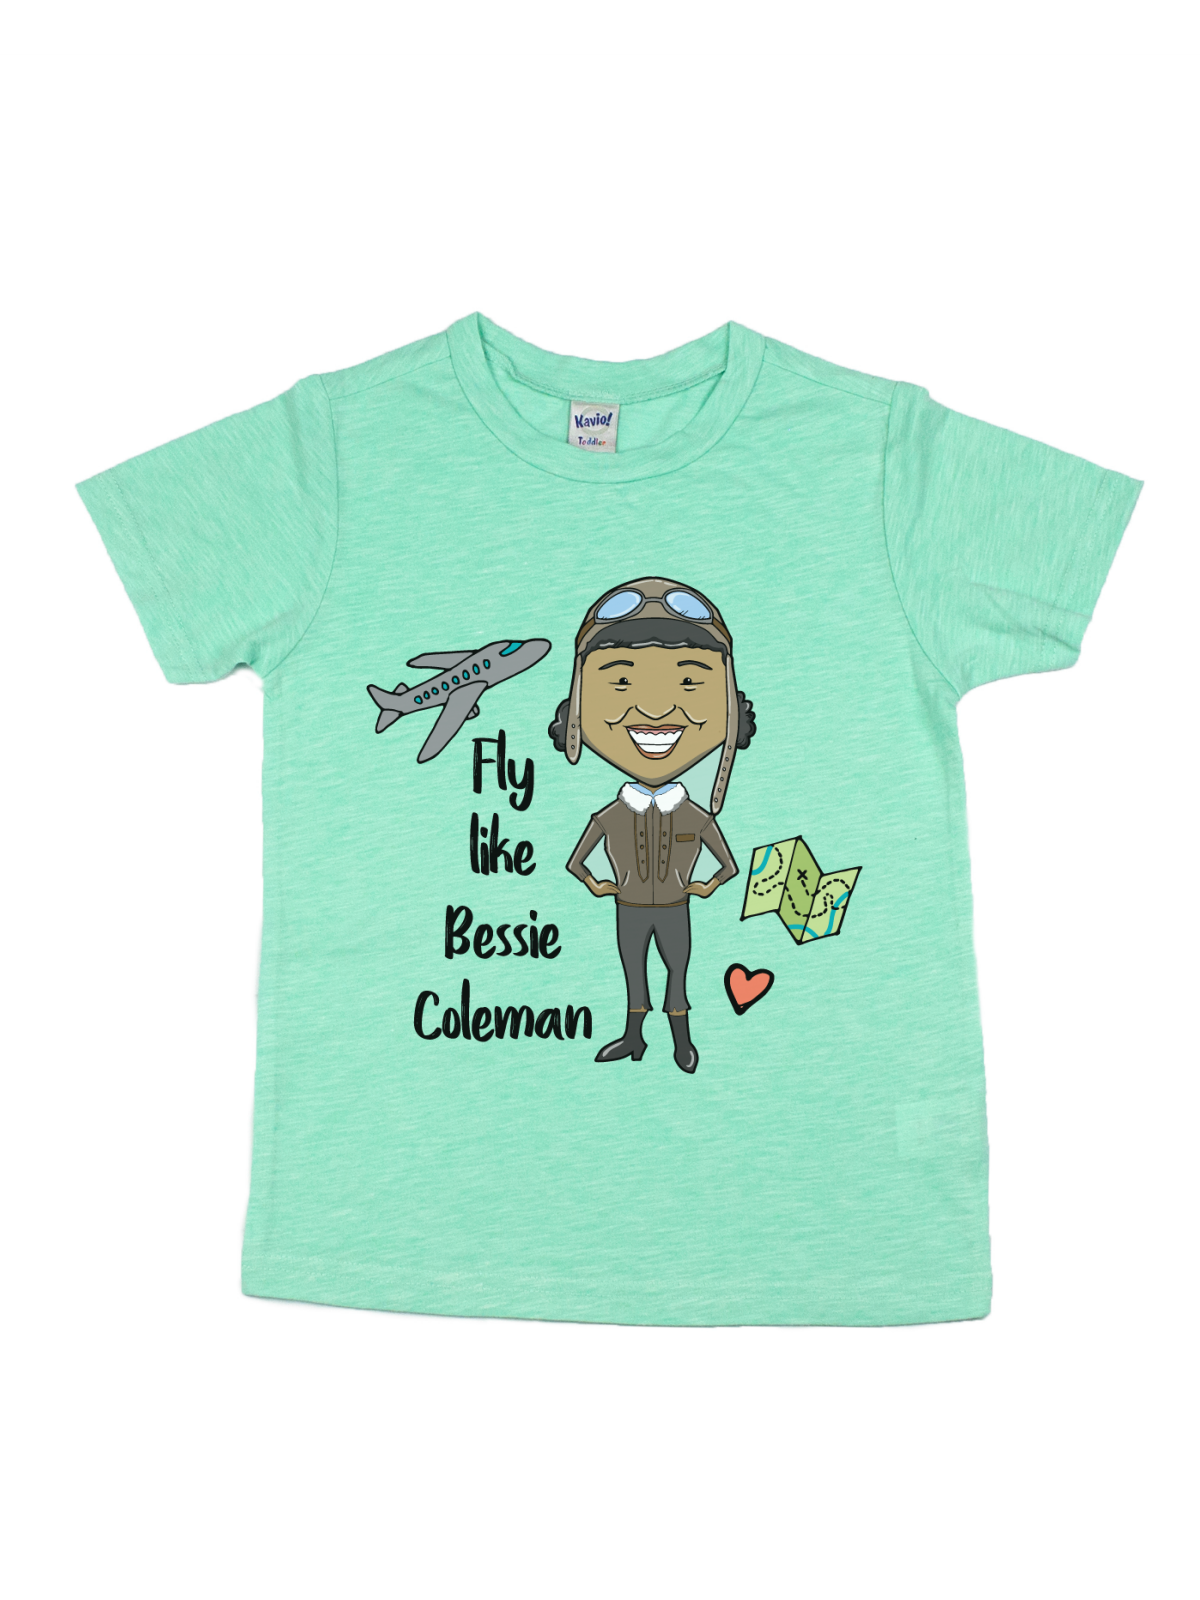 Fly like Bessie Coleman kids Black History Month shirt